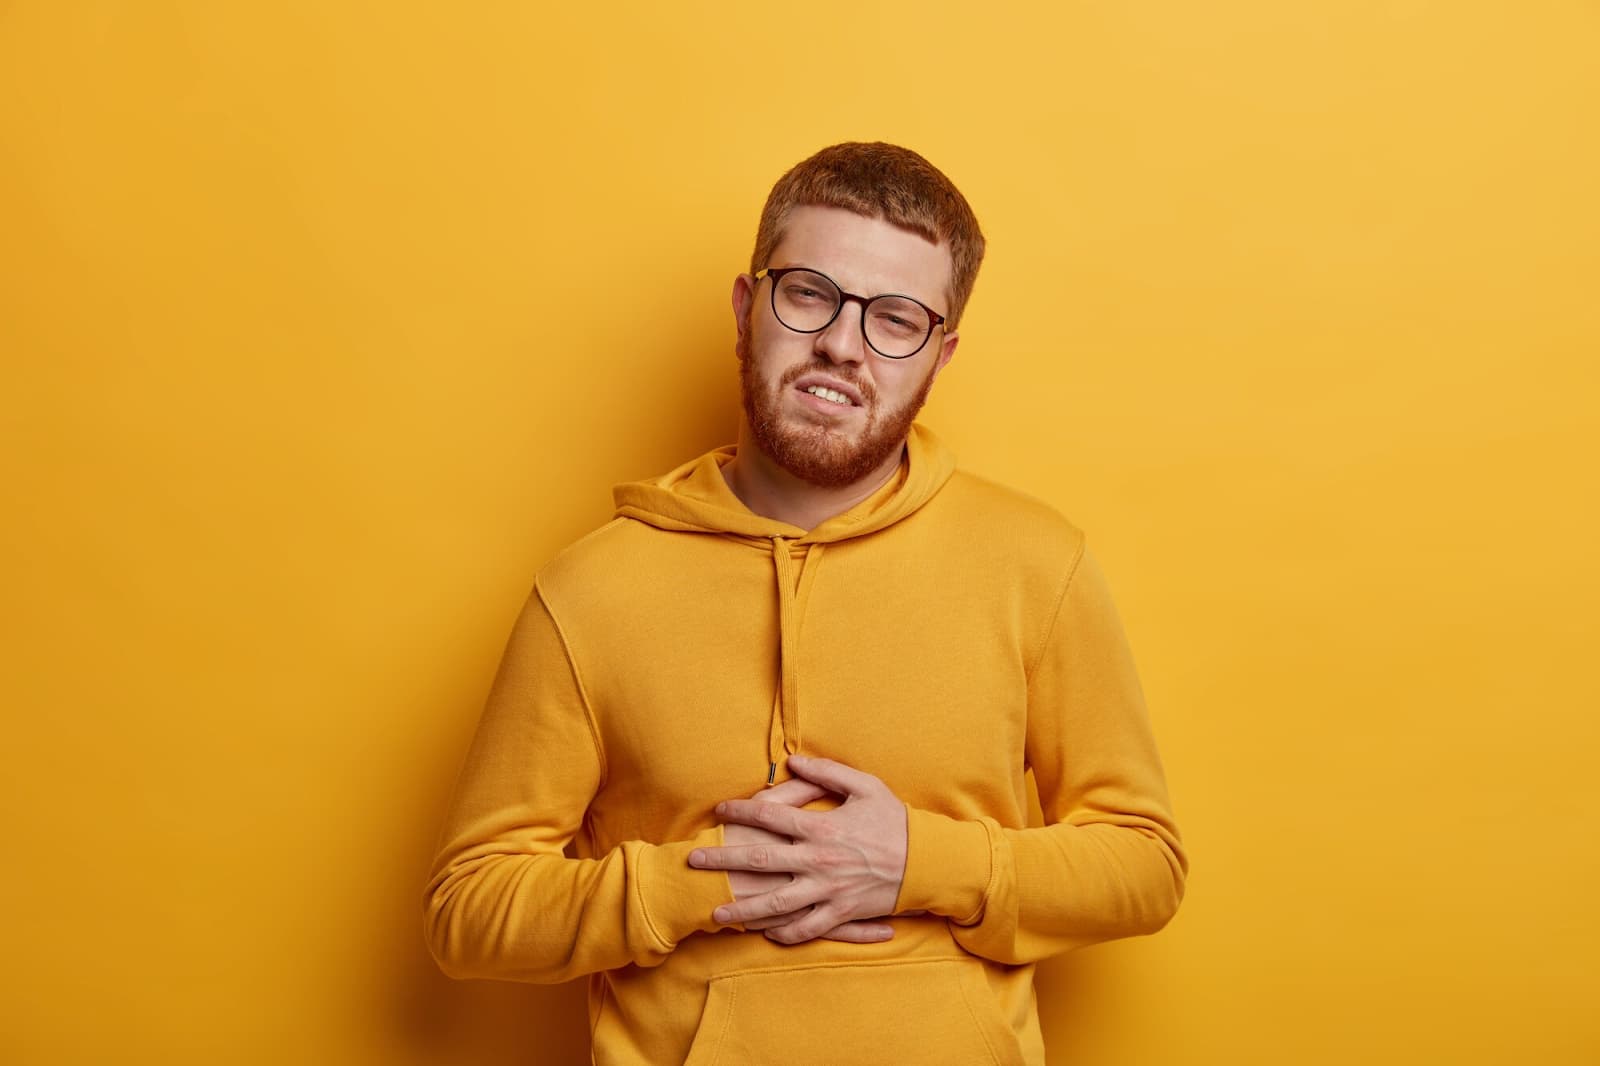 Man holding his stomach on yellow background